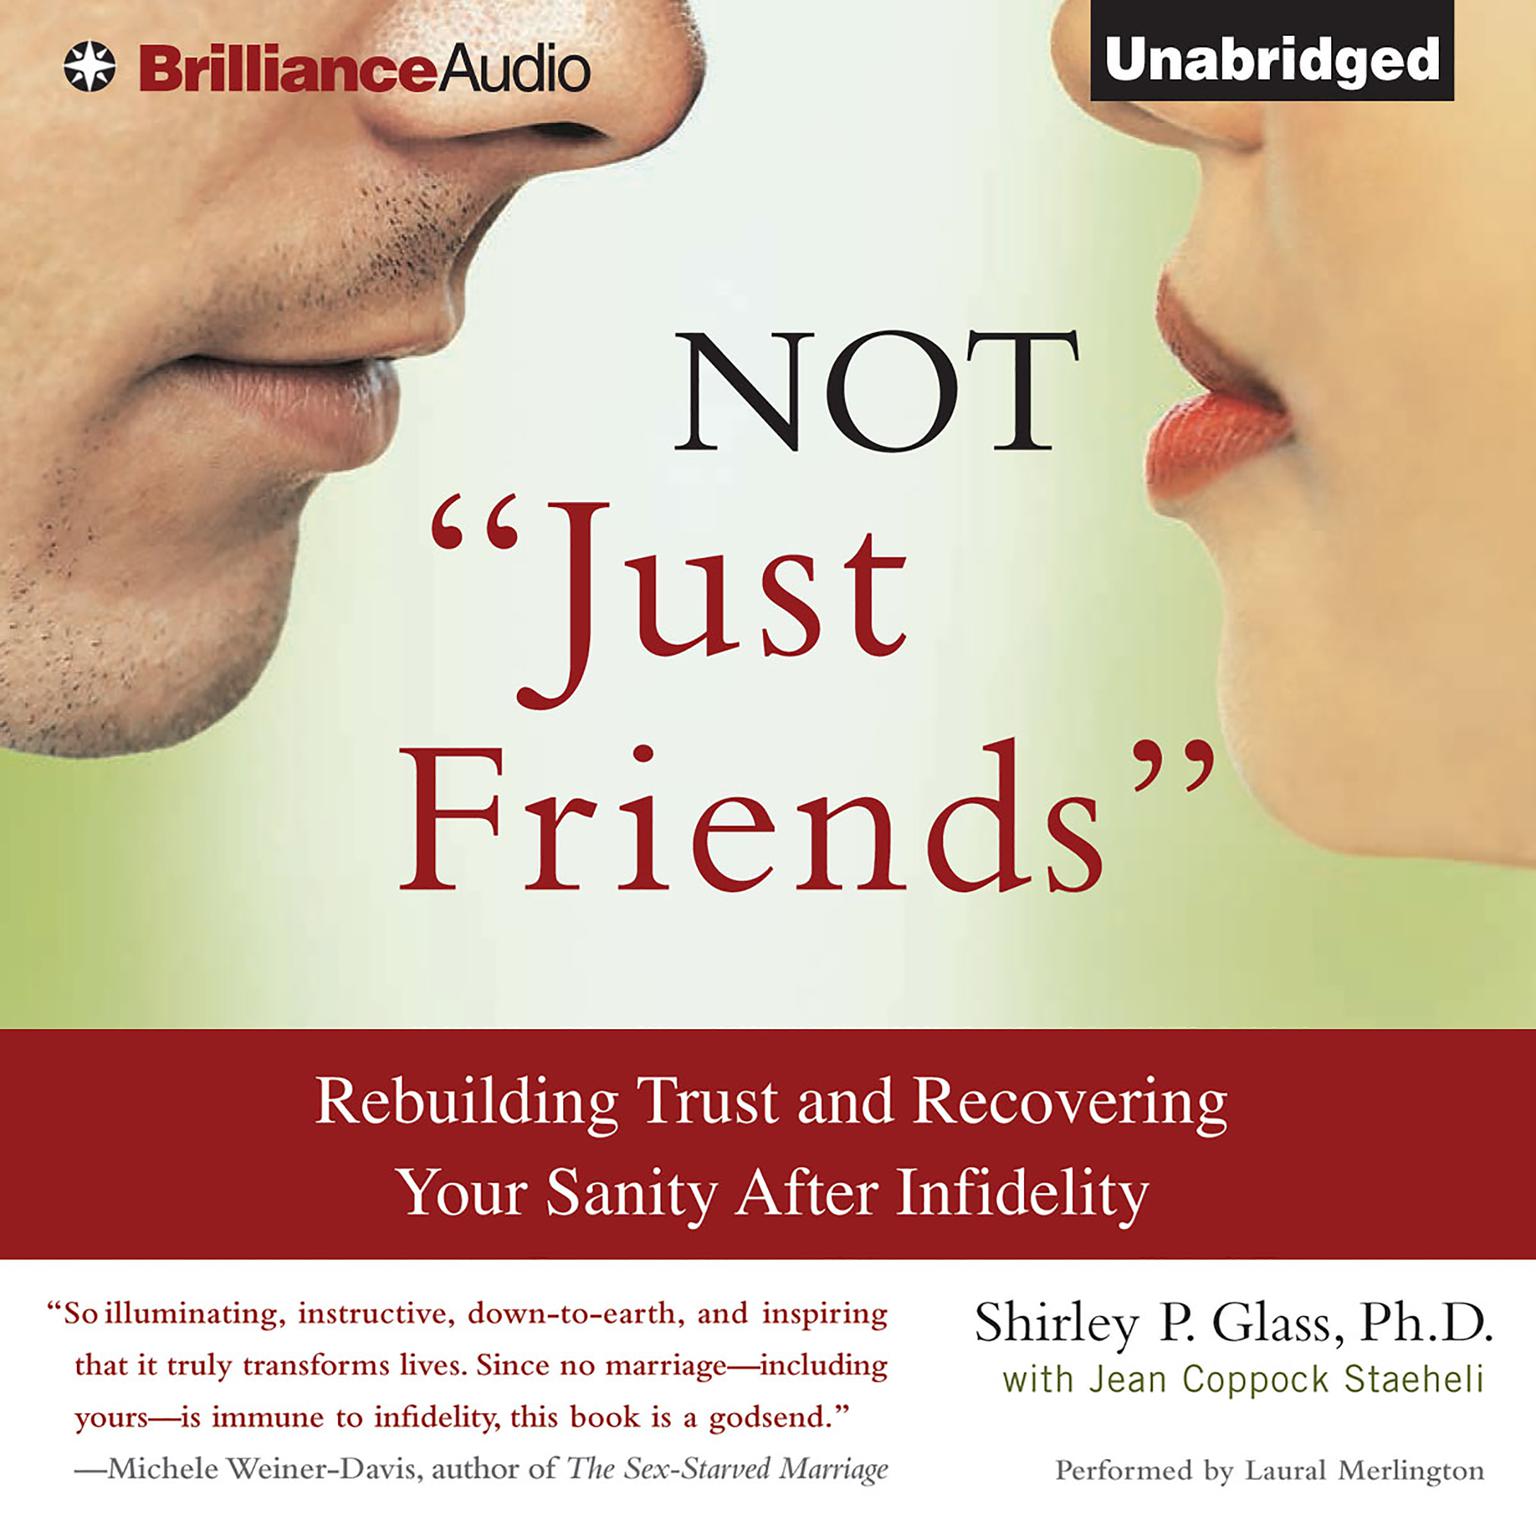 Not Just Friends: Rebuilding Trust and Recovering Your Sanity After Infidelity Audiobook, by Shirley P. Glass